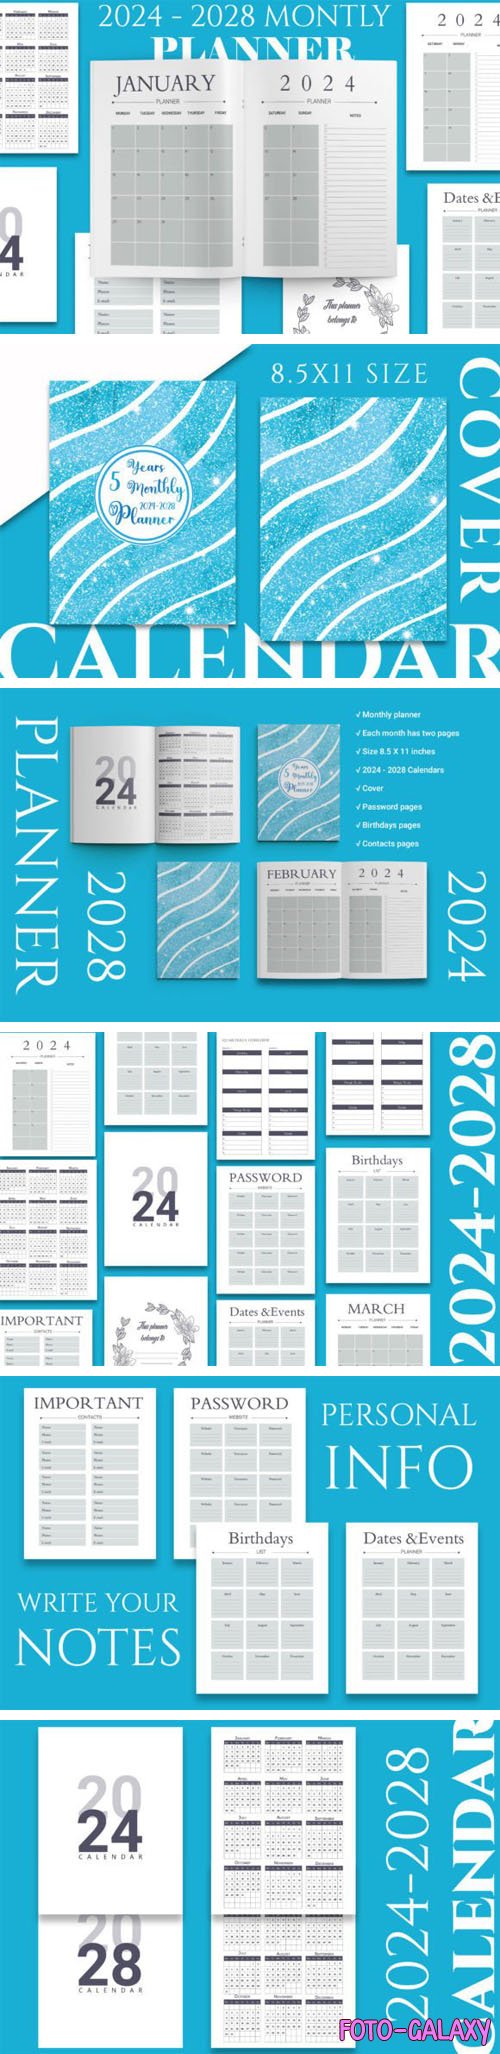 Monthly Planner for Years [2024-2028] - InDesign Templates